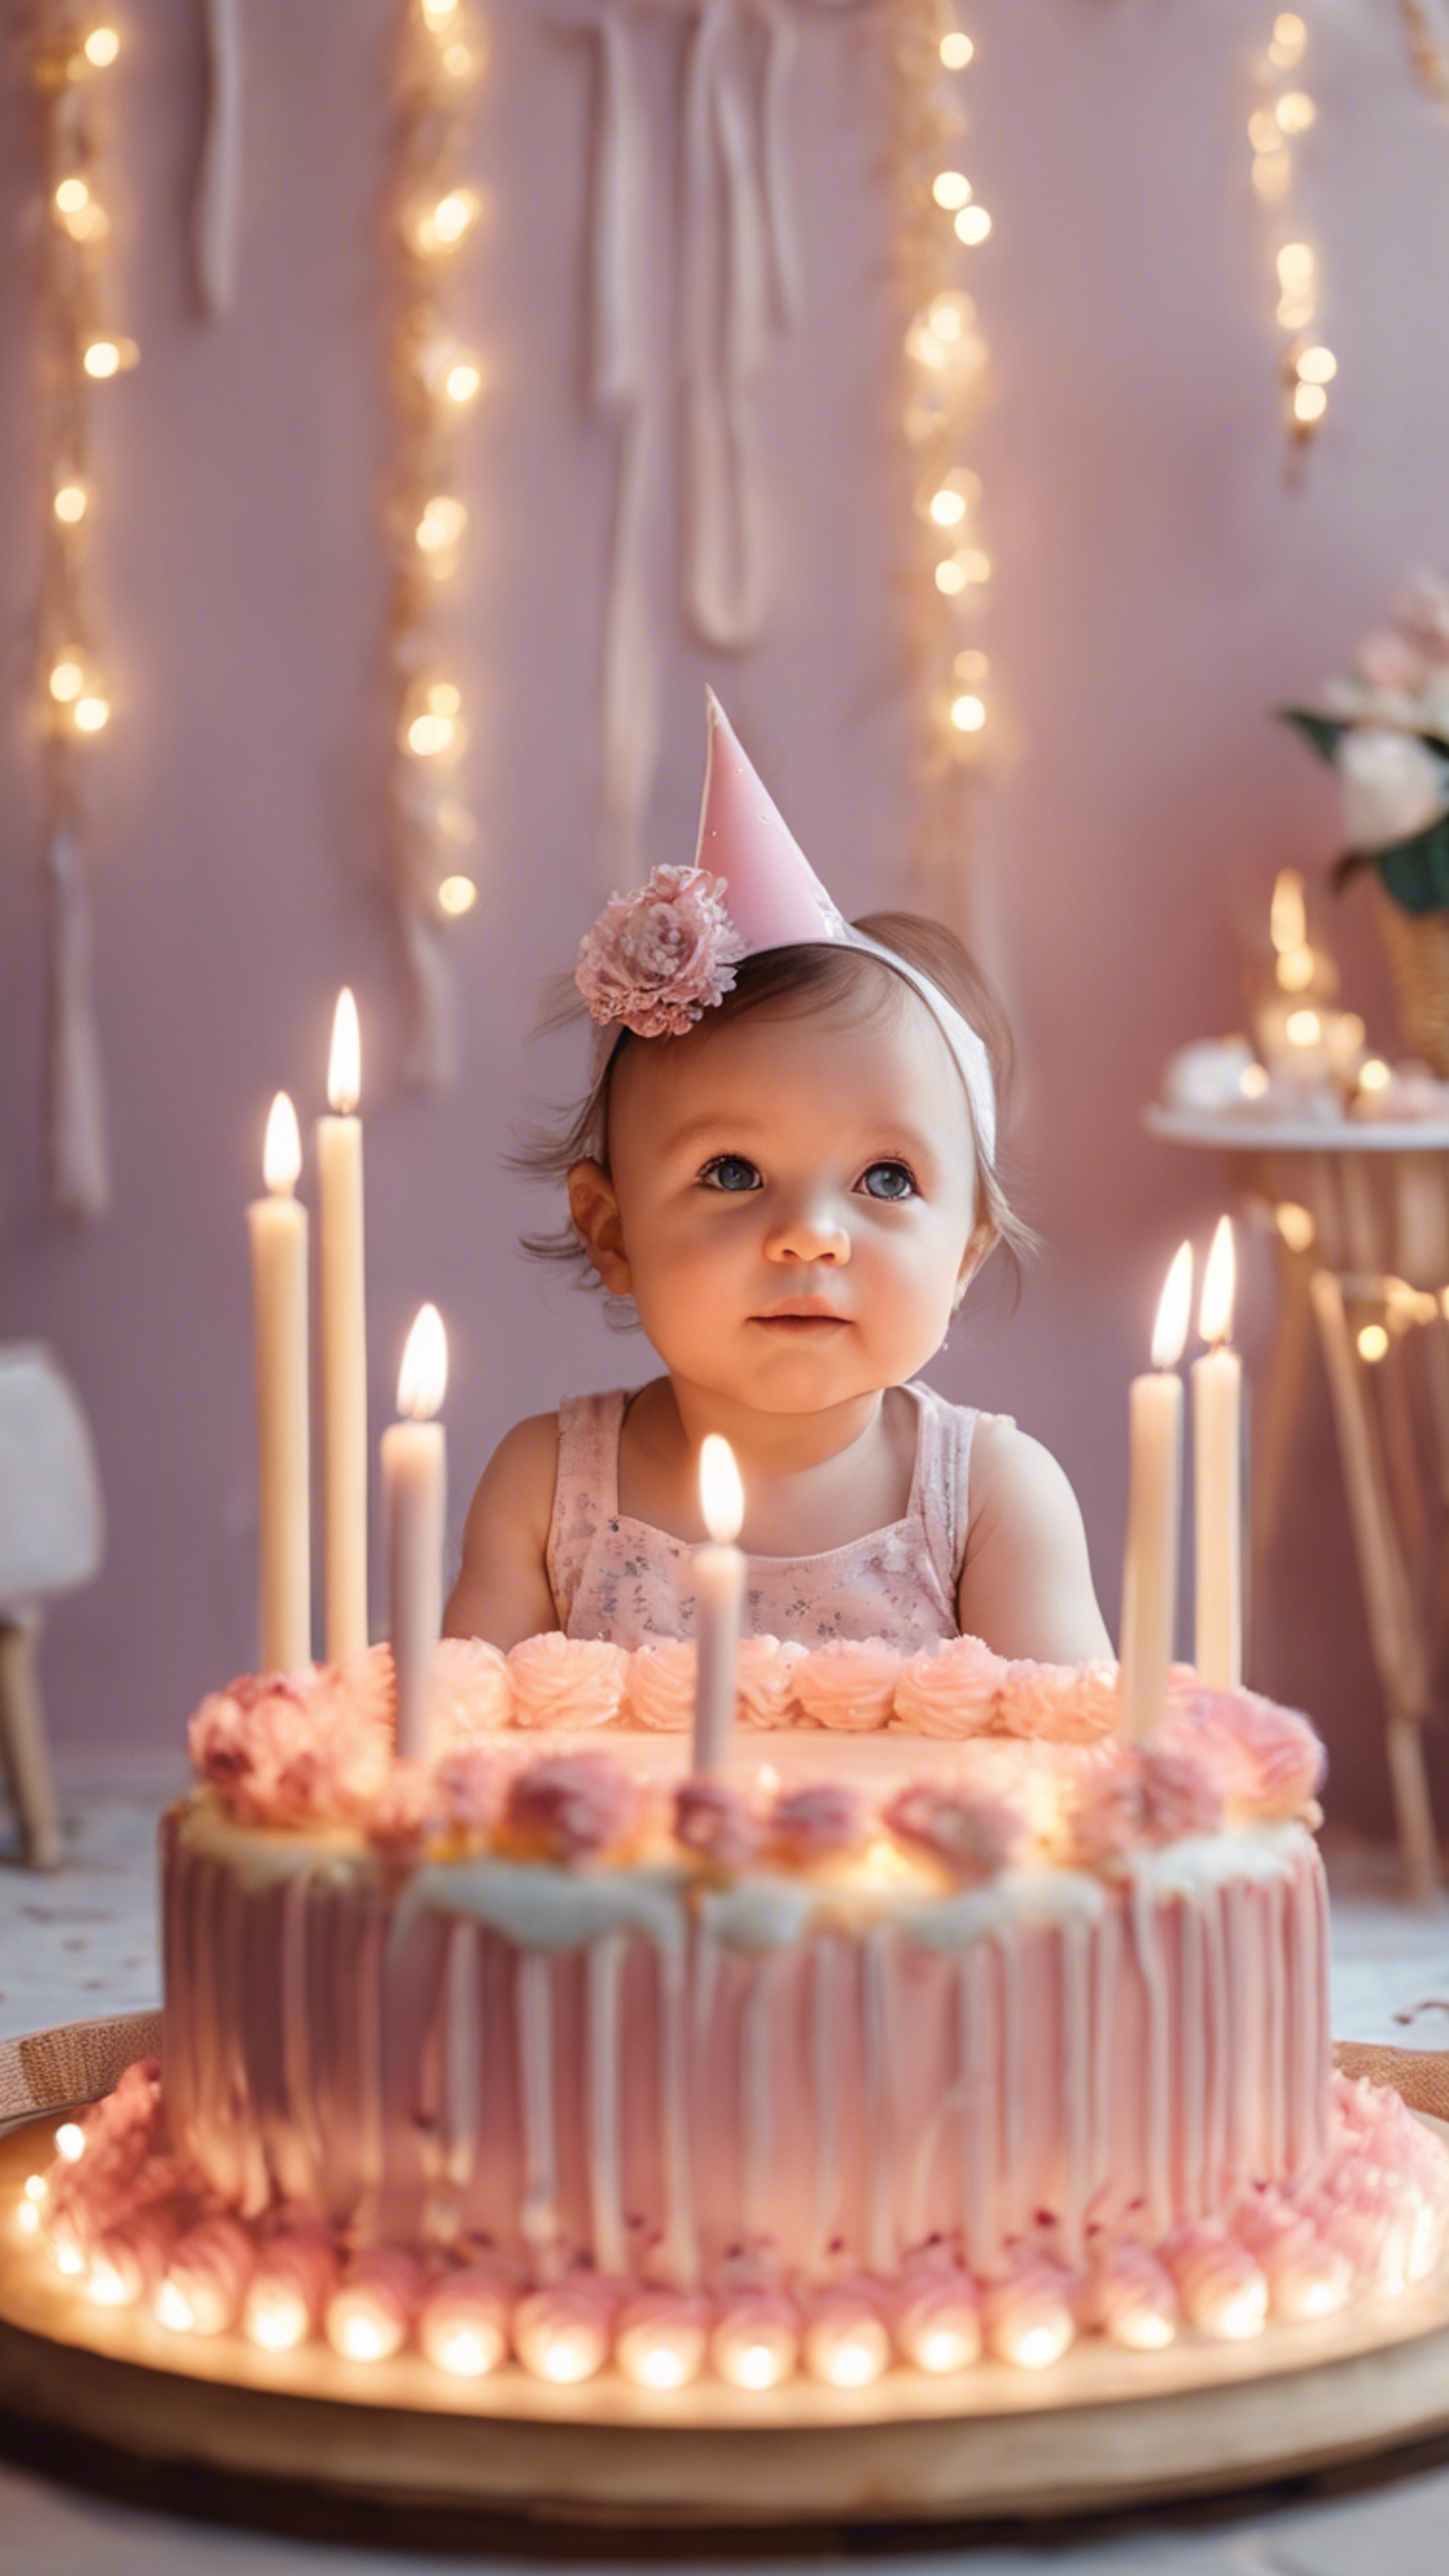 A baby girl sitting in front of a large birthday cake with one candle. Hình nền[40d9127ac31741659290]